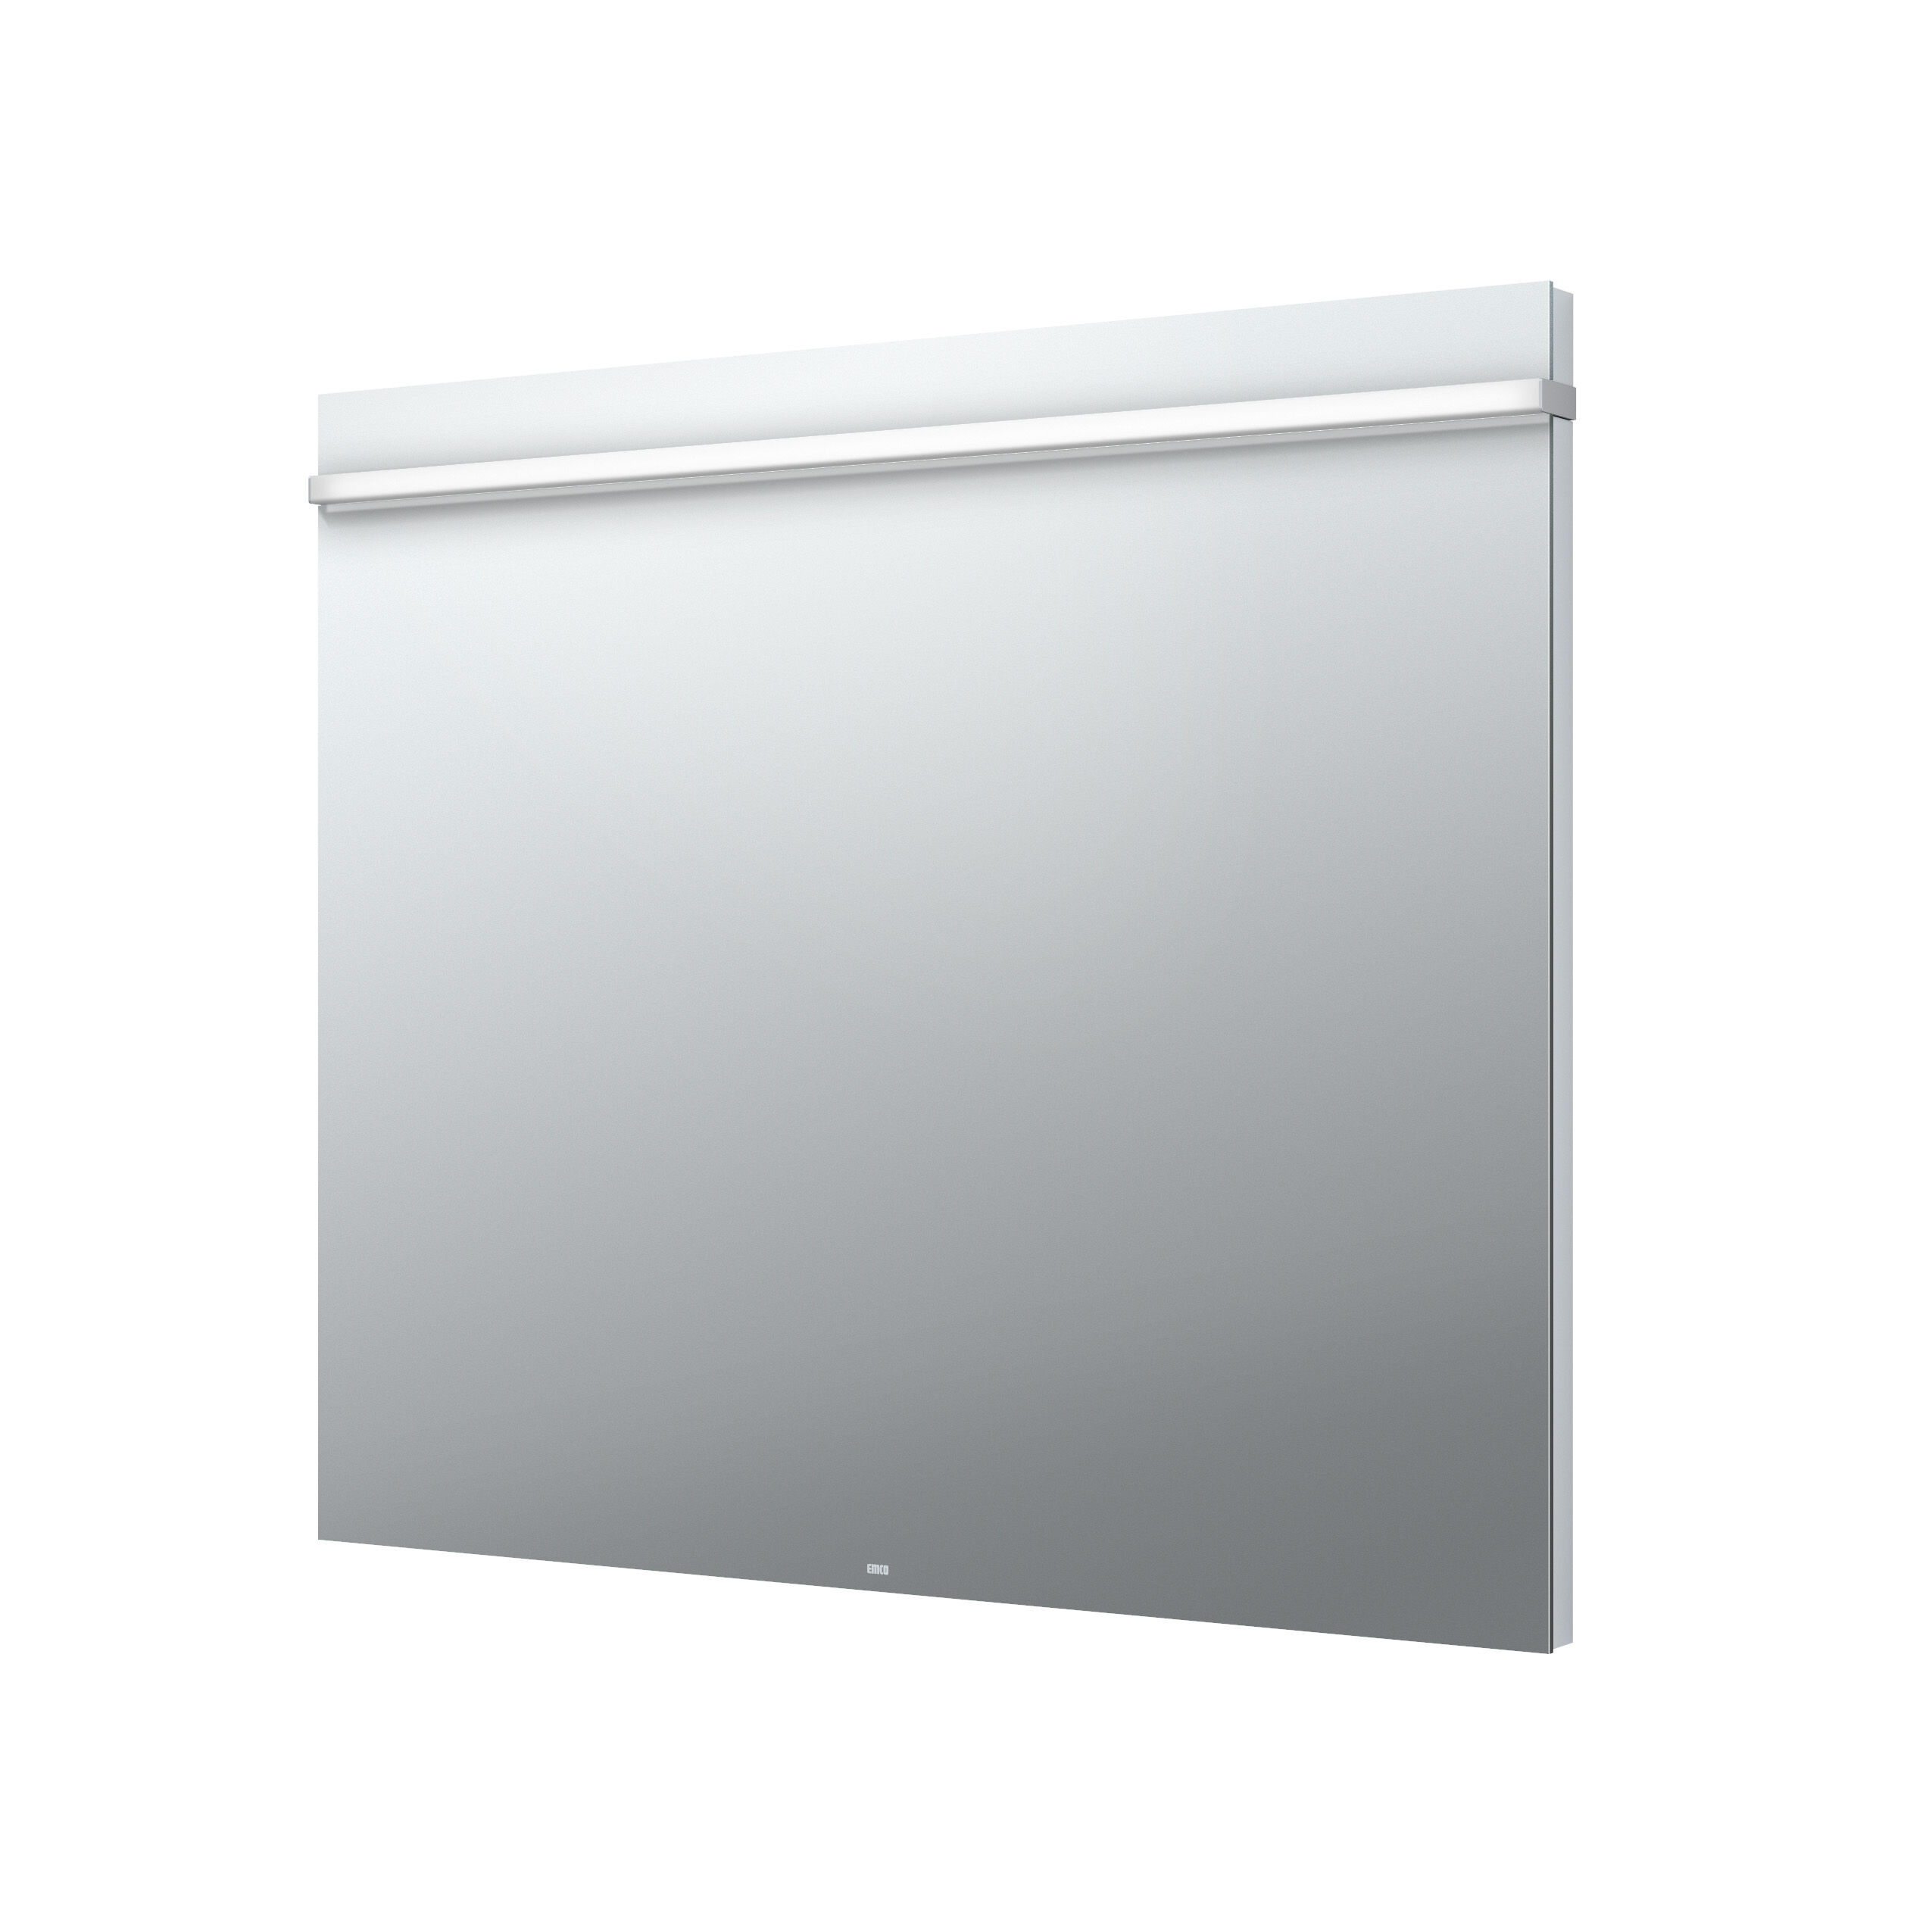 Emco Select LED Lichtspiegel 449600081 810x700mm, mit Touch-Sensor